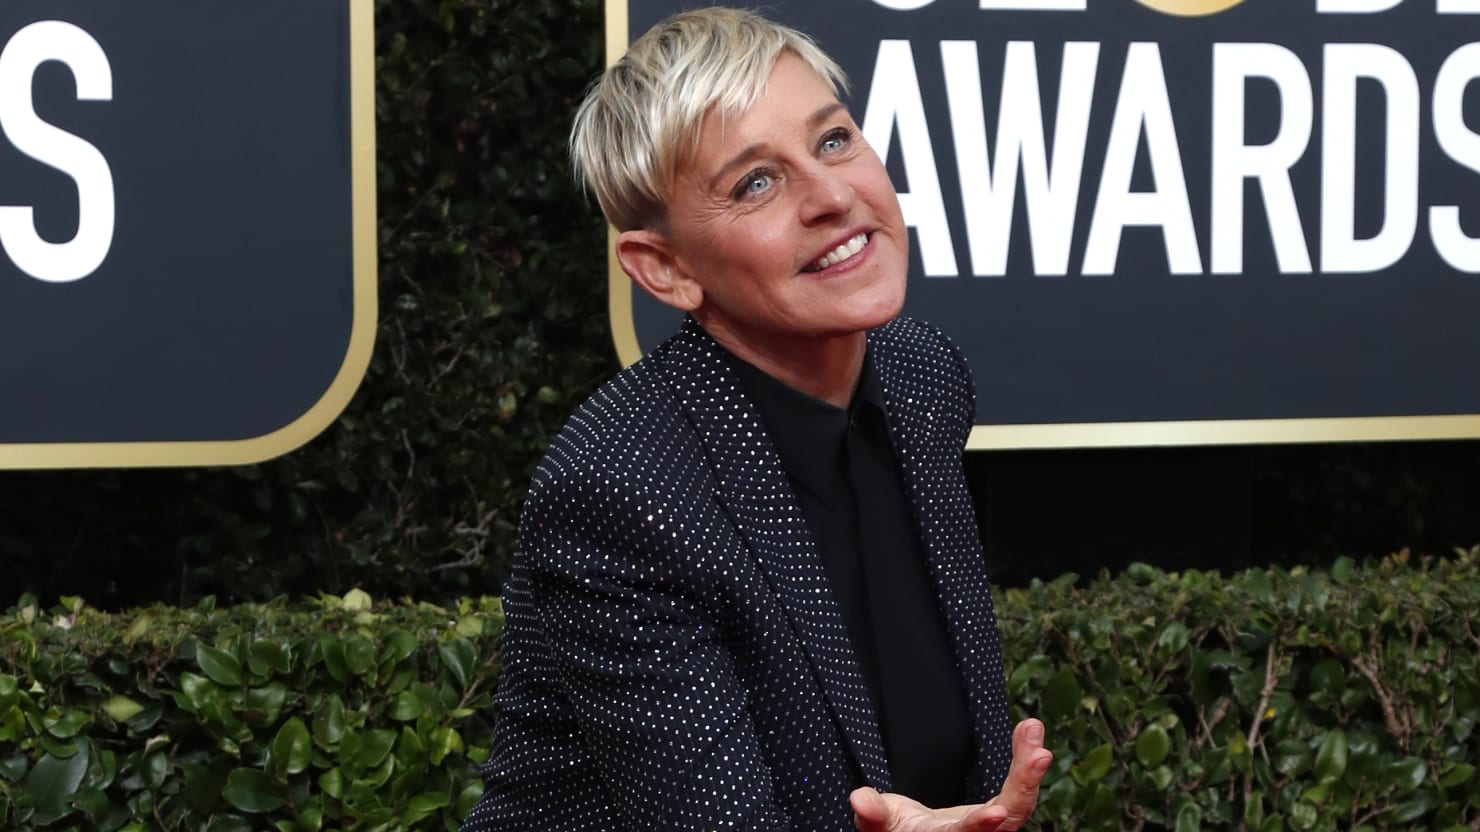 From ‘Most Hated Person’ to ‘Moving Forward’: Ellen DeGeneres Opens Up About Toxic Work Environment Challenges